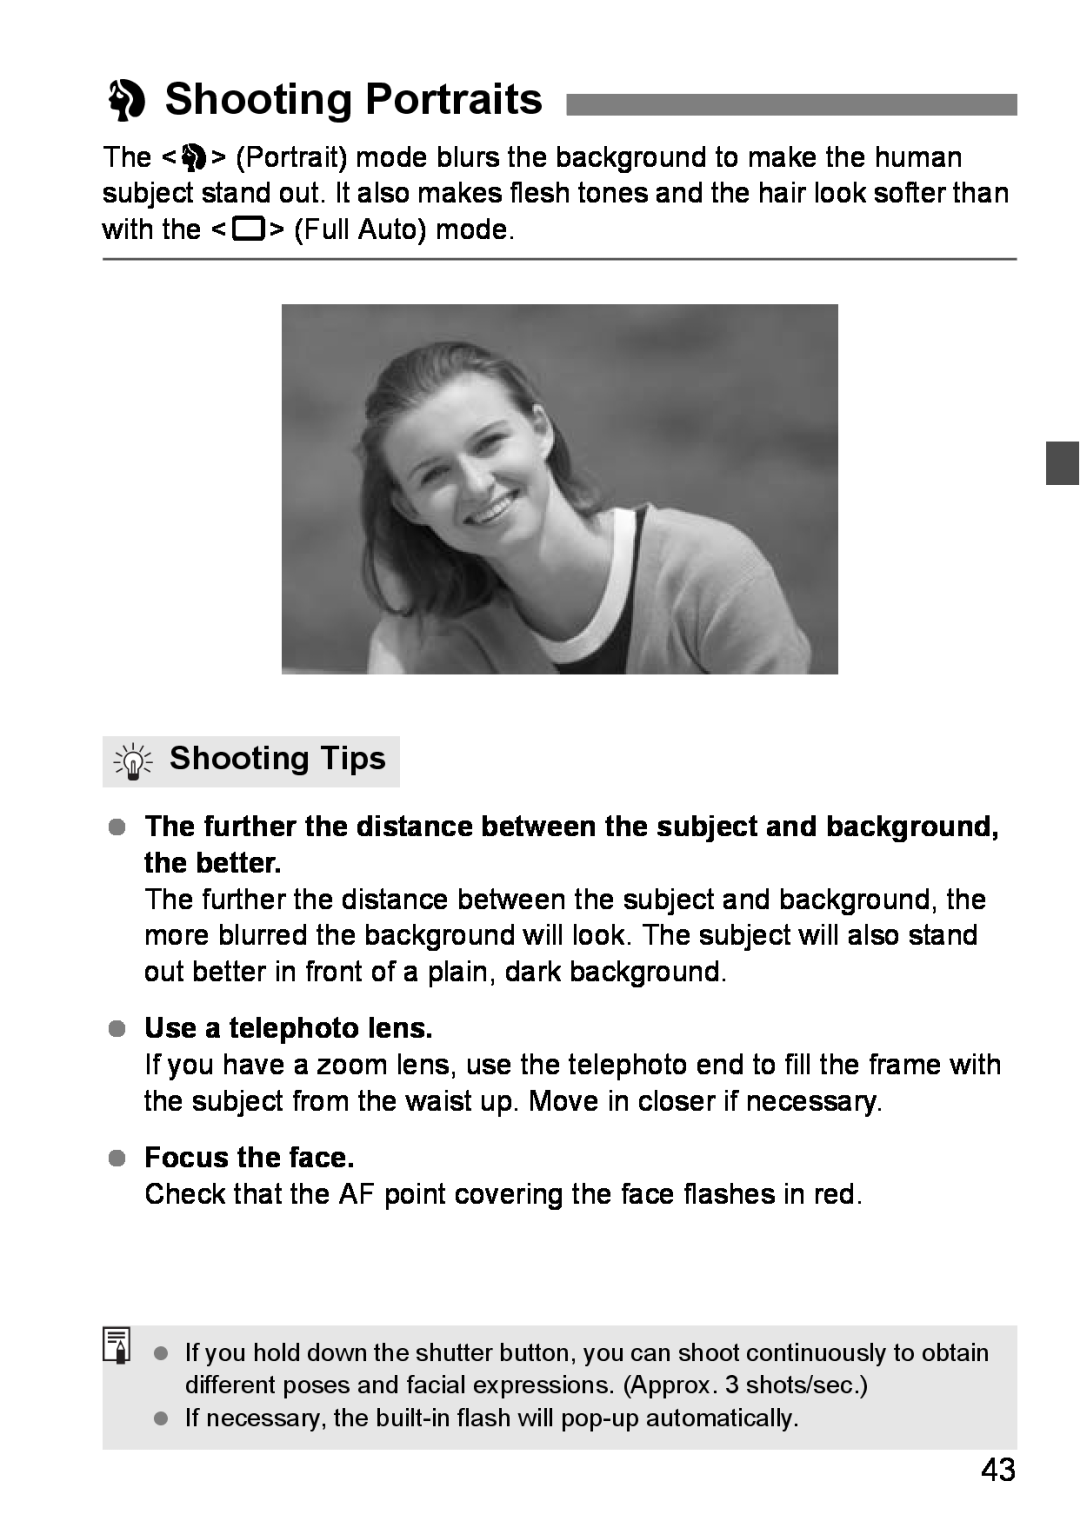 Canon EOS DIGITAL REBEL XTI instruction manual 2Shooting Portraits, Shooting Tips, Use a telephoto lens, Focus the face 